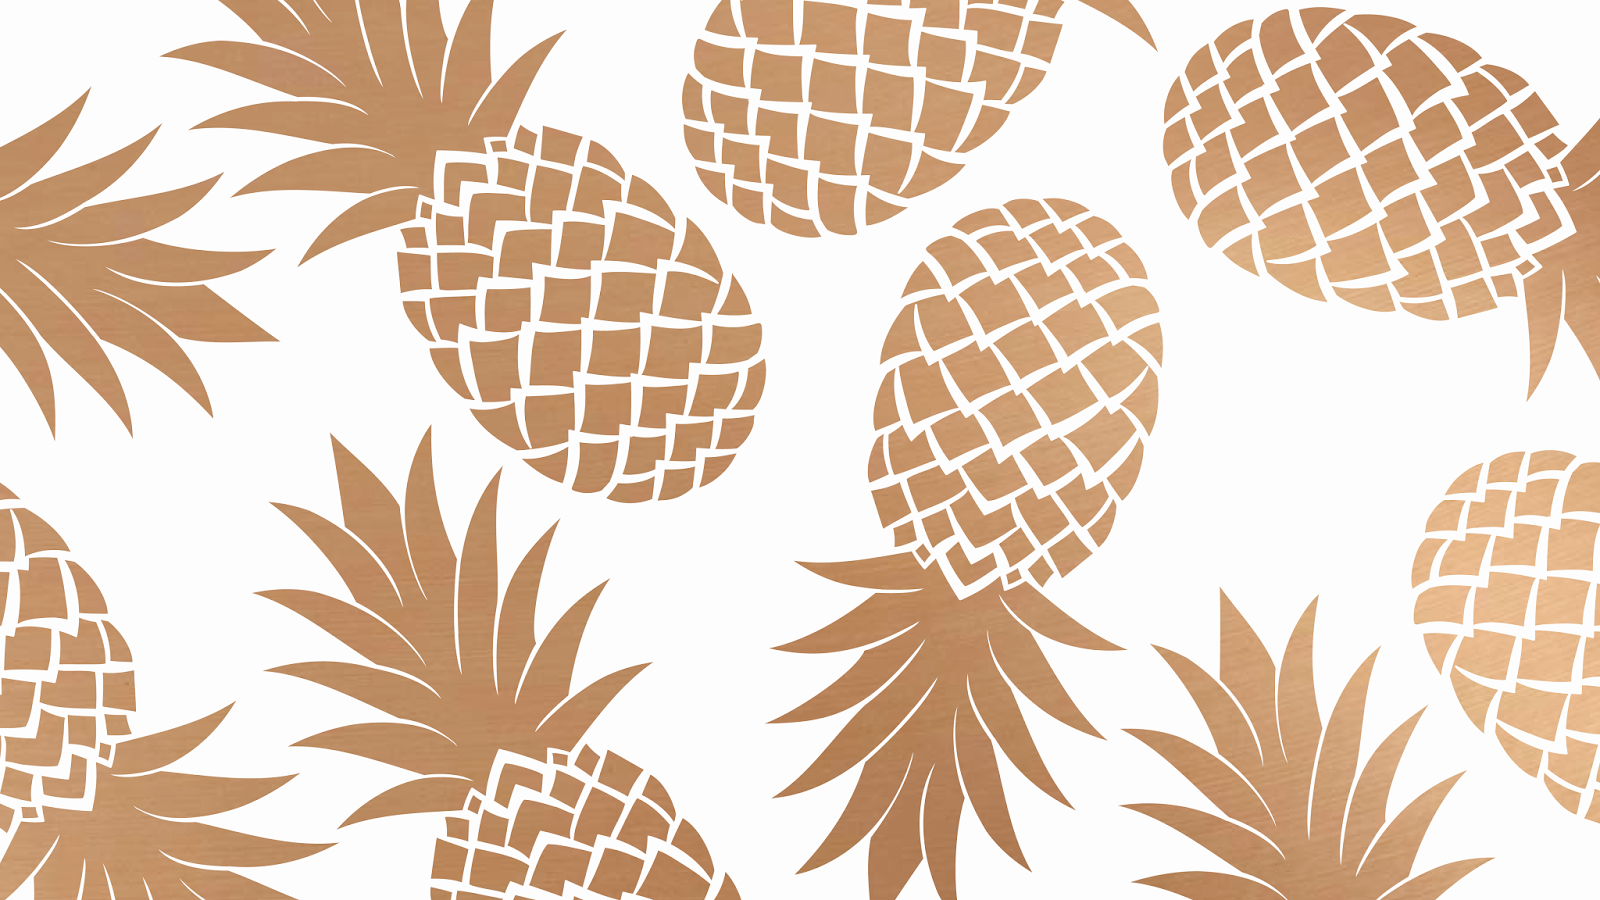 It's finally Friday! Yay. Even though it's been nearly 100 degrees here in the midwest (uggh), I. Pineapple wallpaper, Desktop wallpaper summer, Macbook wallpaper